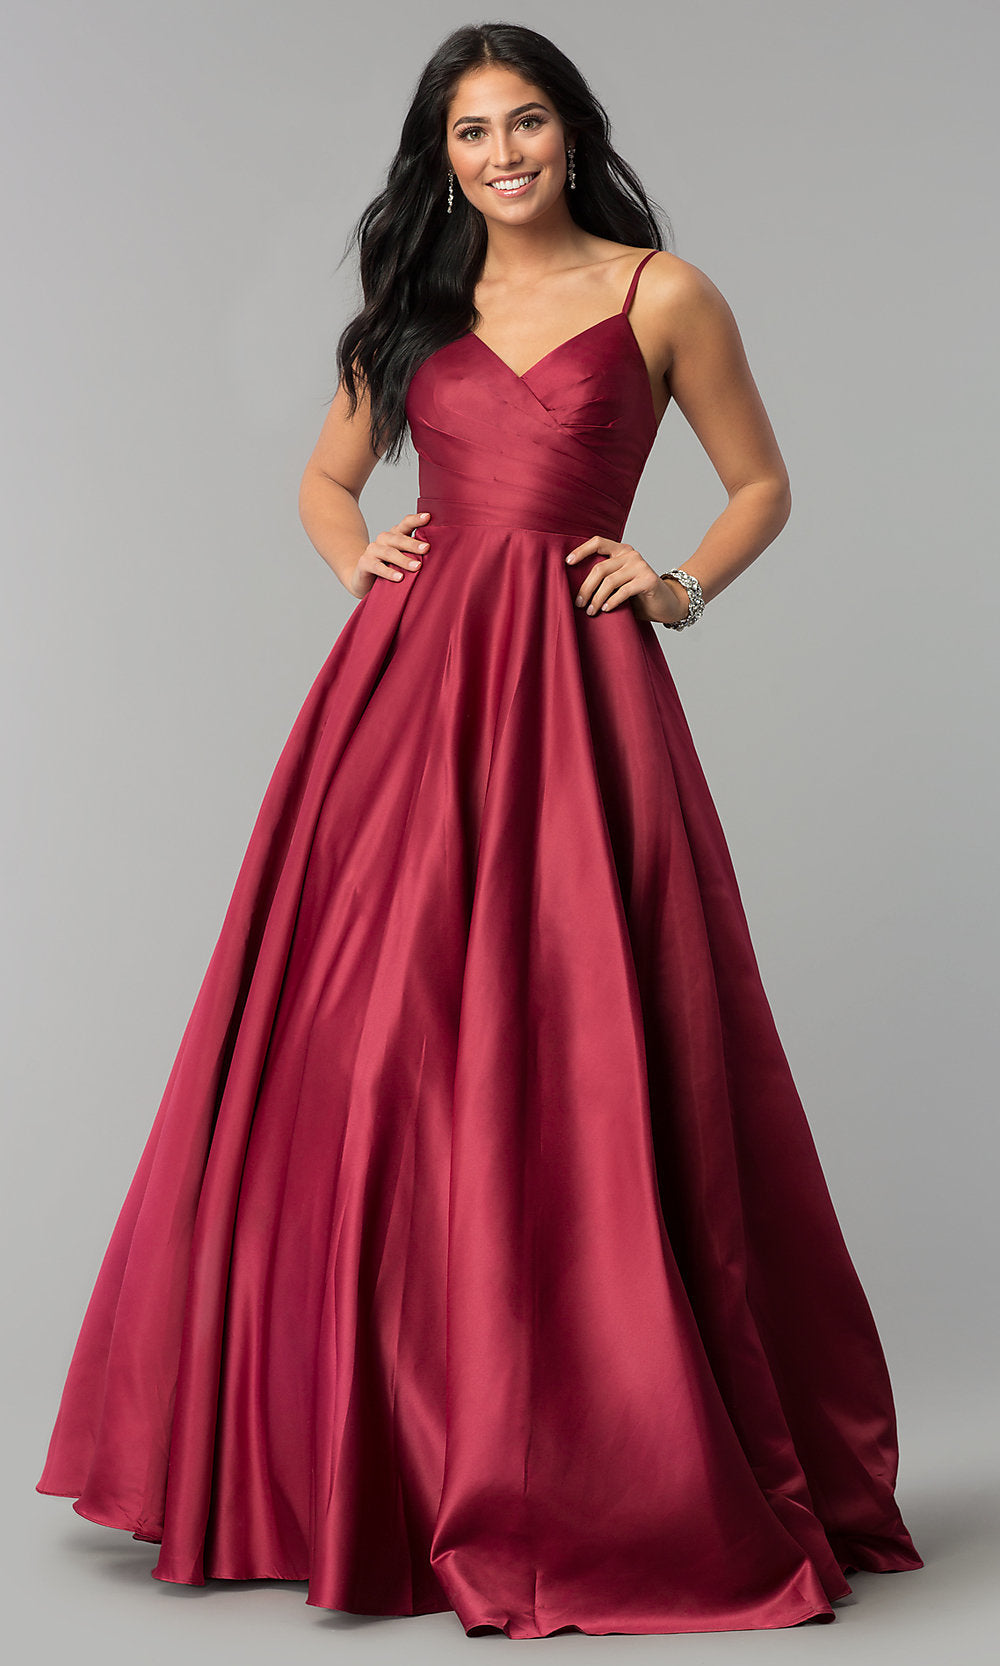 V-Neck Simple Classic Ball Gown for Prom